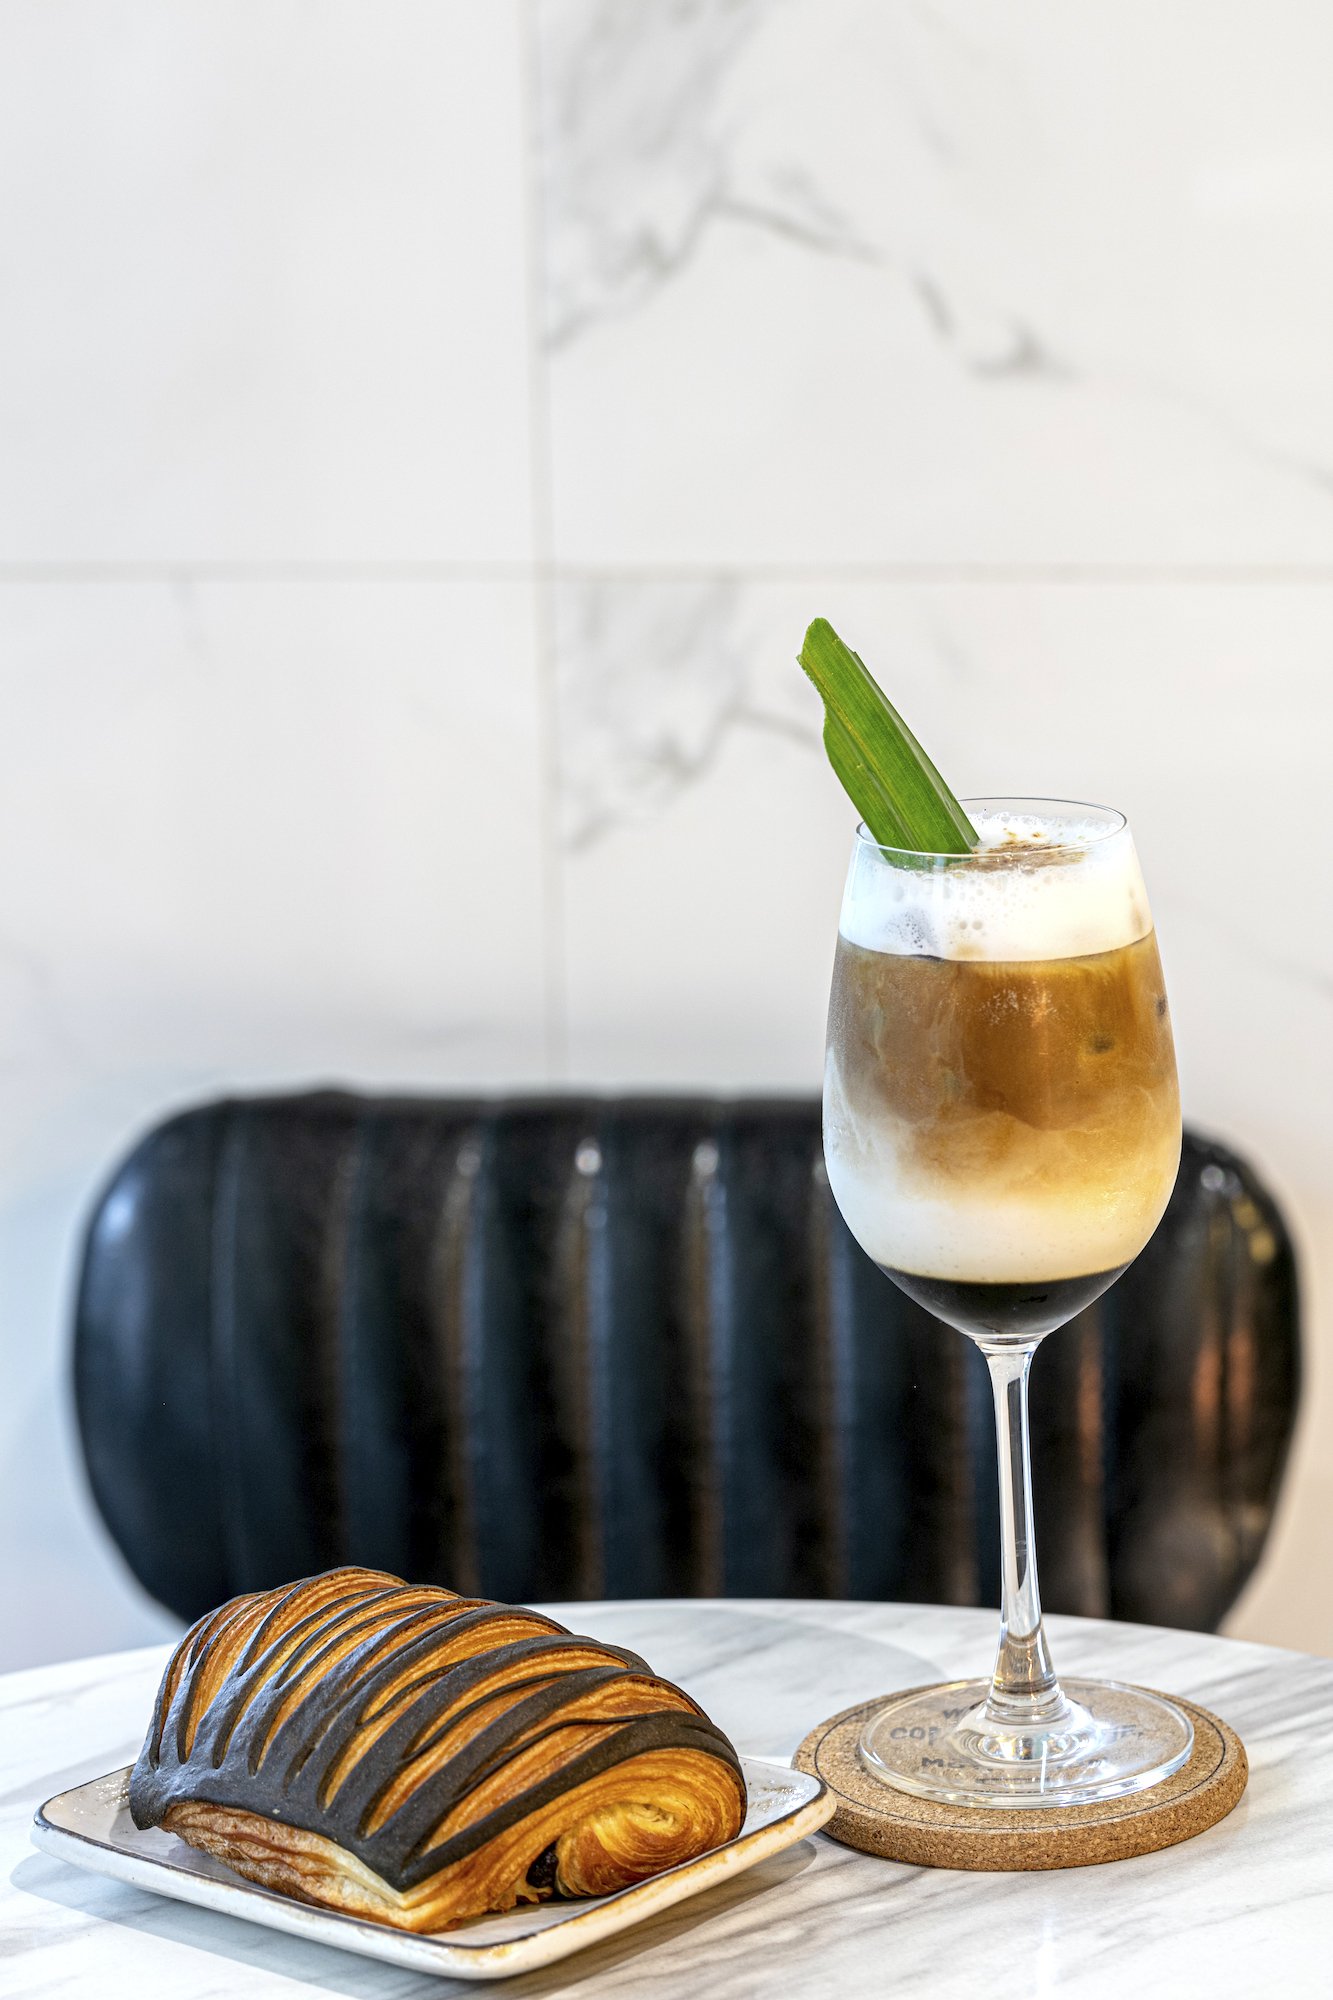 The Coffee Academics serves the brands’ signature lattes like the Jawa, an iced Indonesian palm sugar macchiato with a hint of coconut and pandan